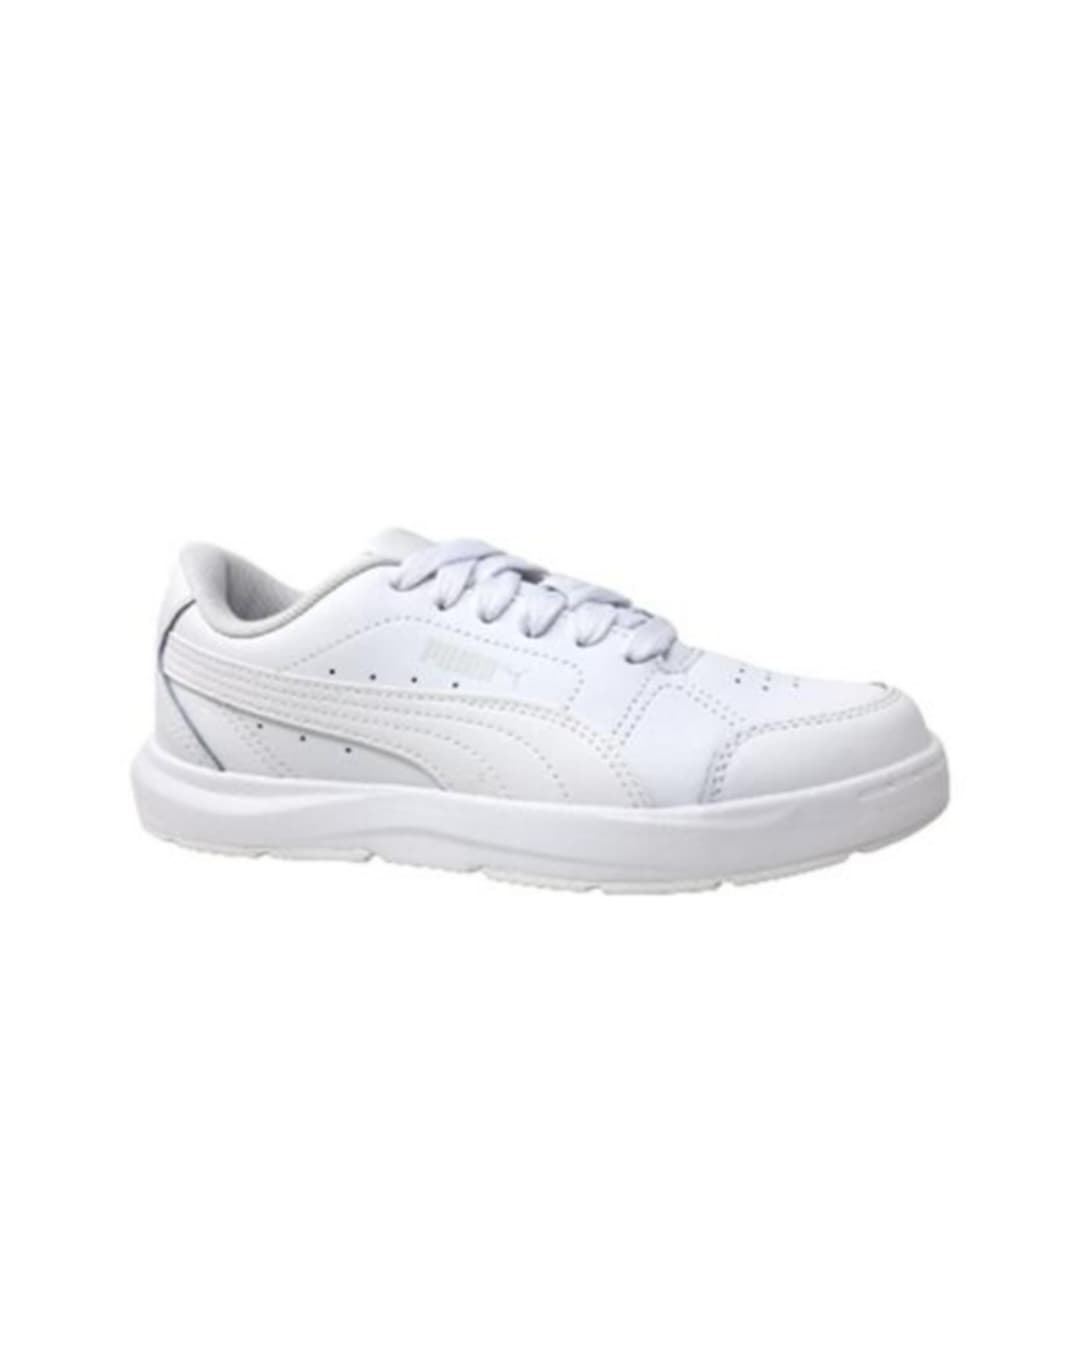 Puma Evolve Court Jr White Children's Sneakers with Lace - Image 1